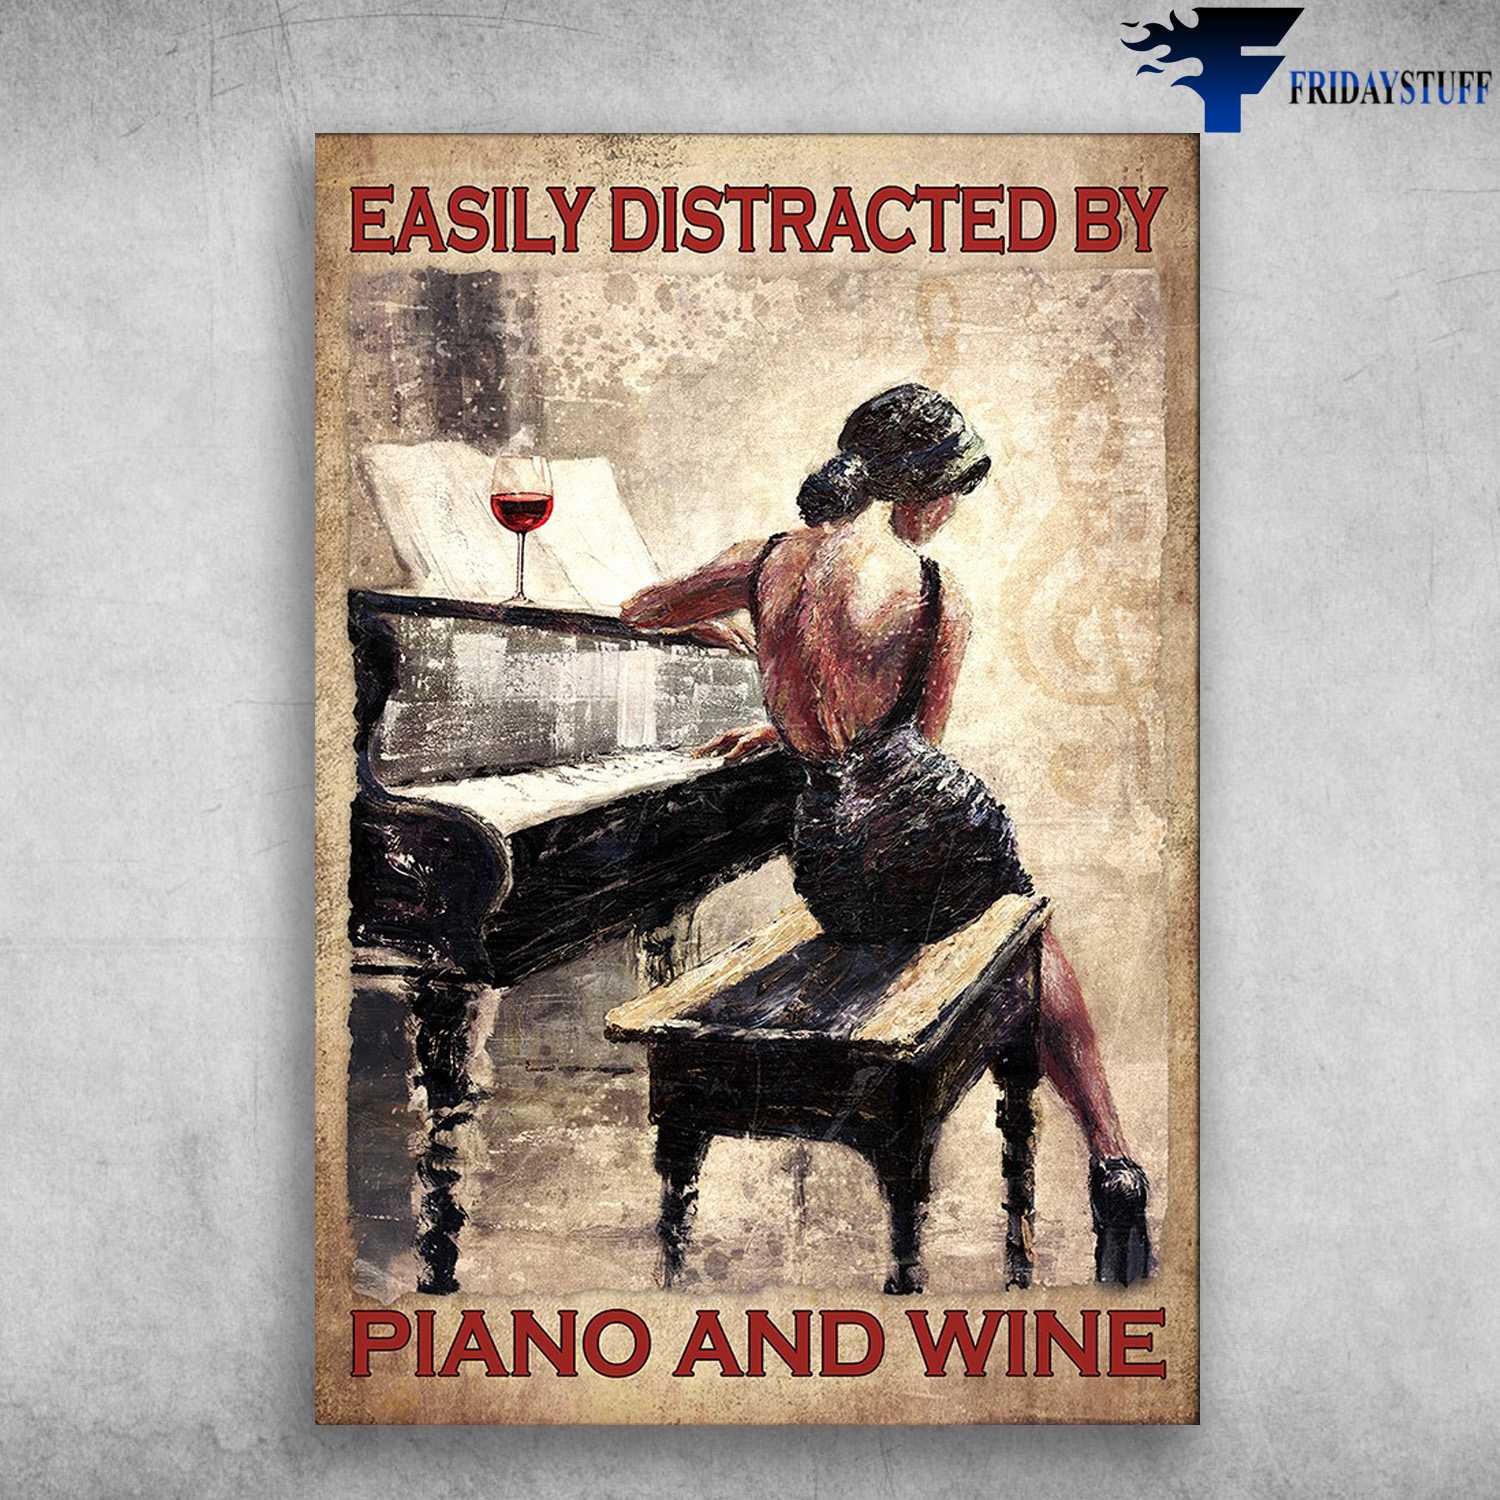 Music And Drinks - Easily Dis Tracted By, Piano And Wine